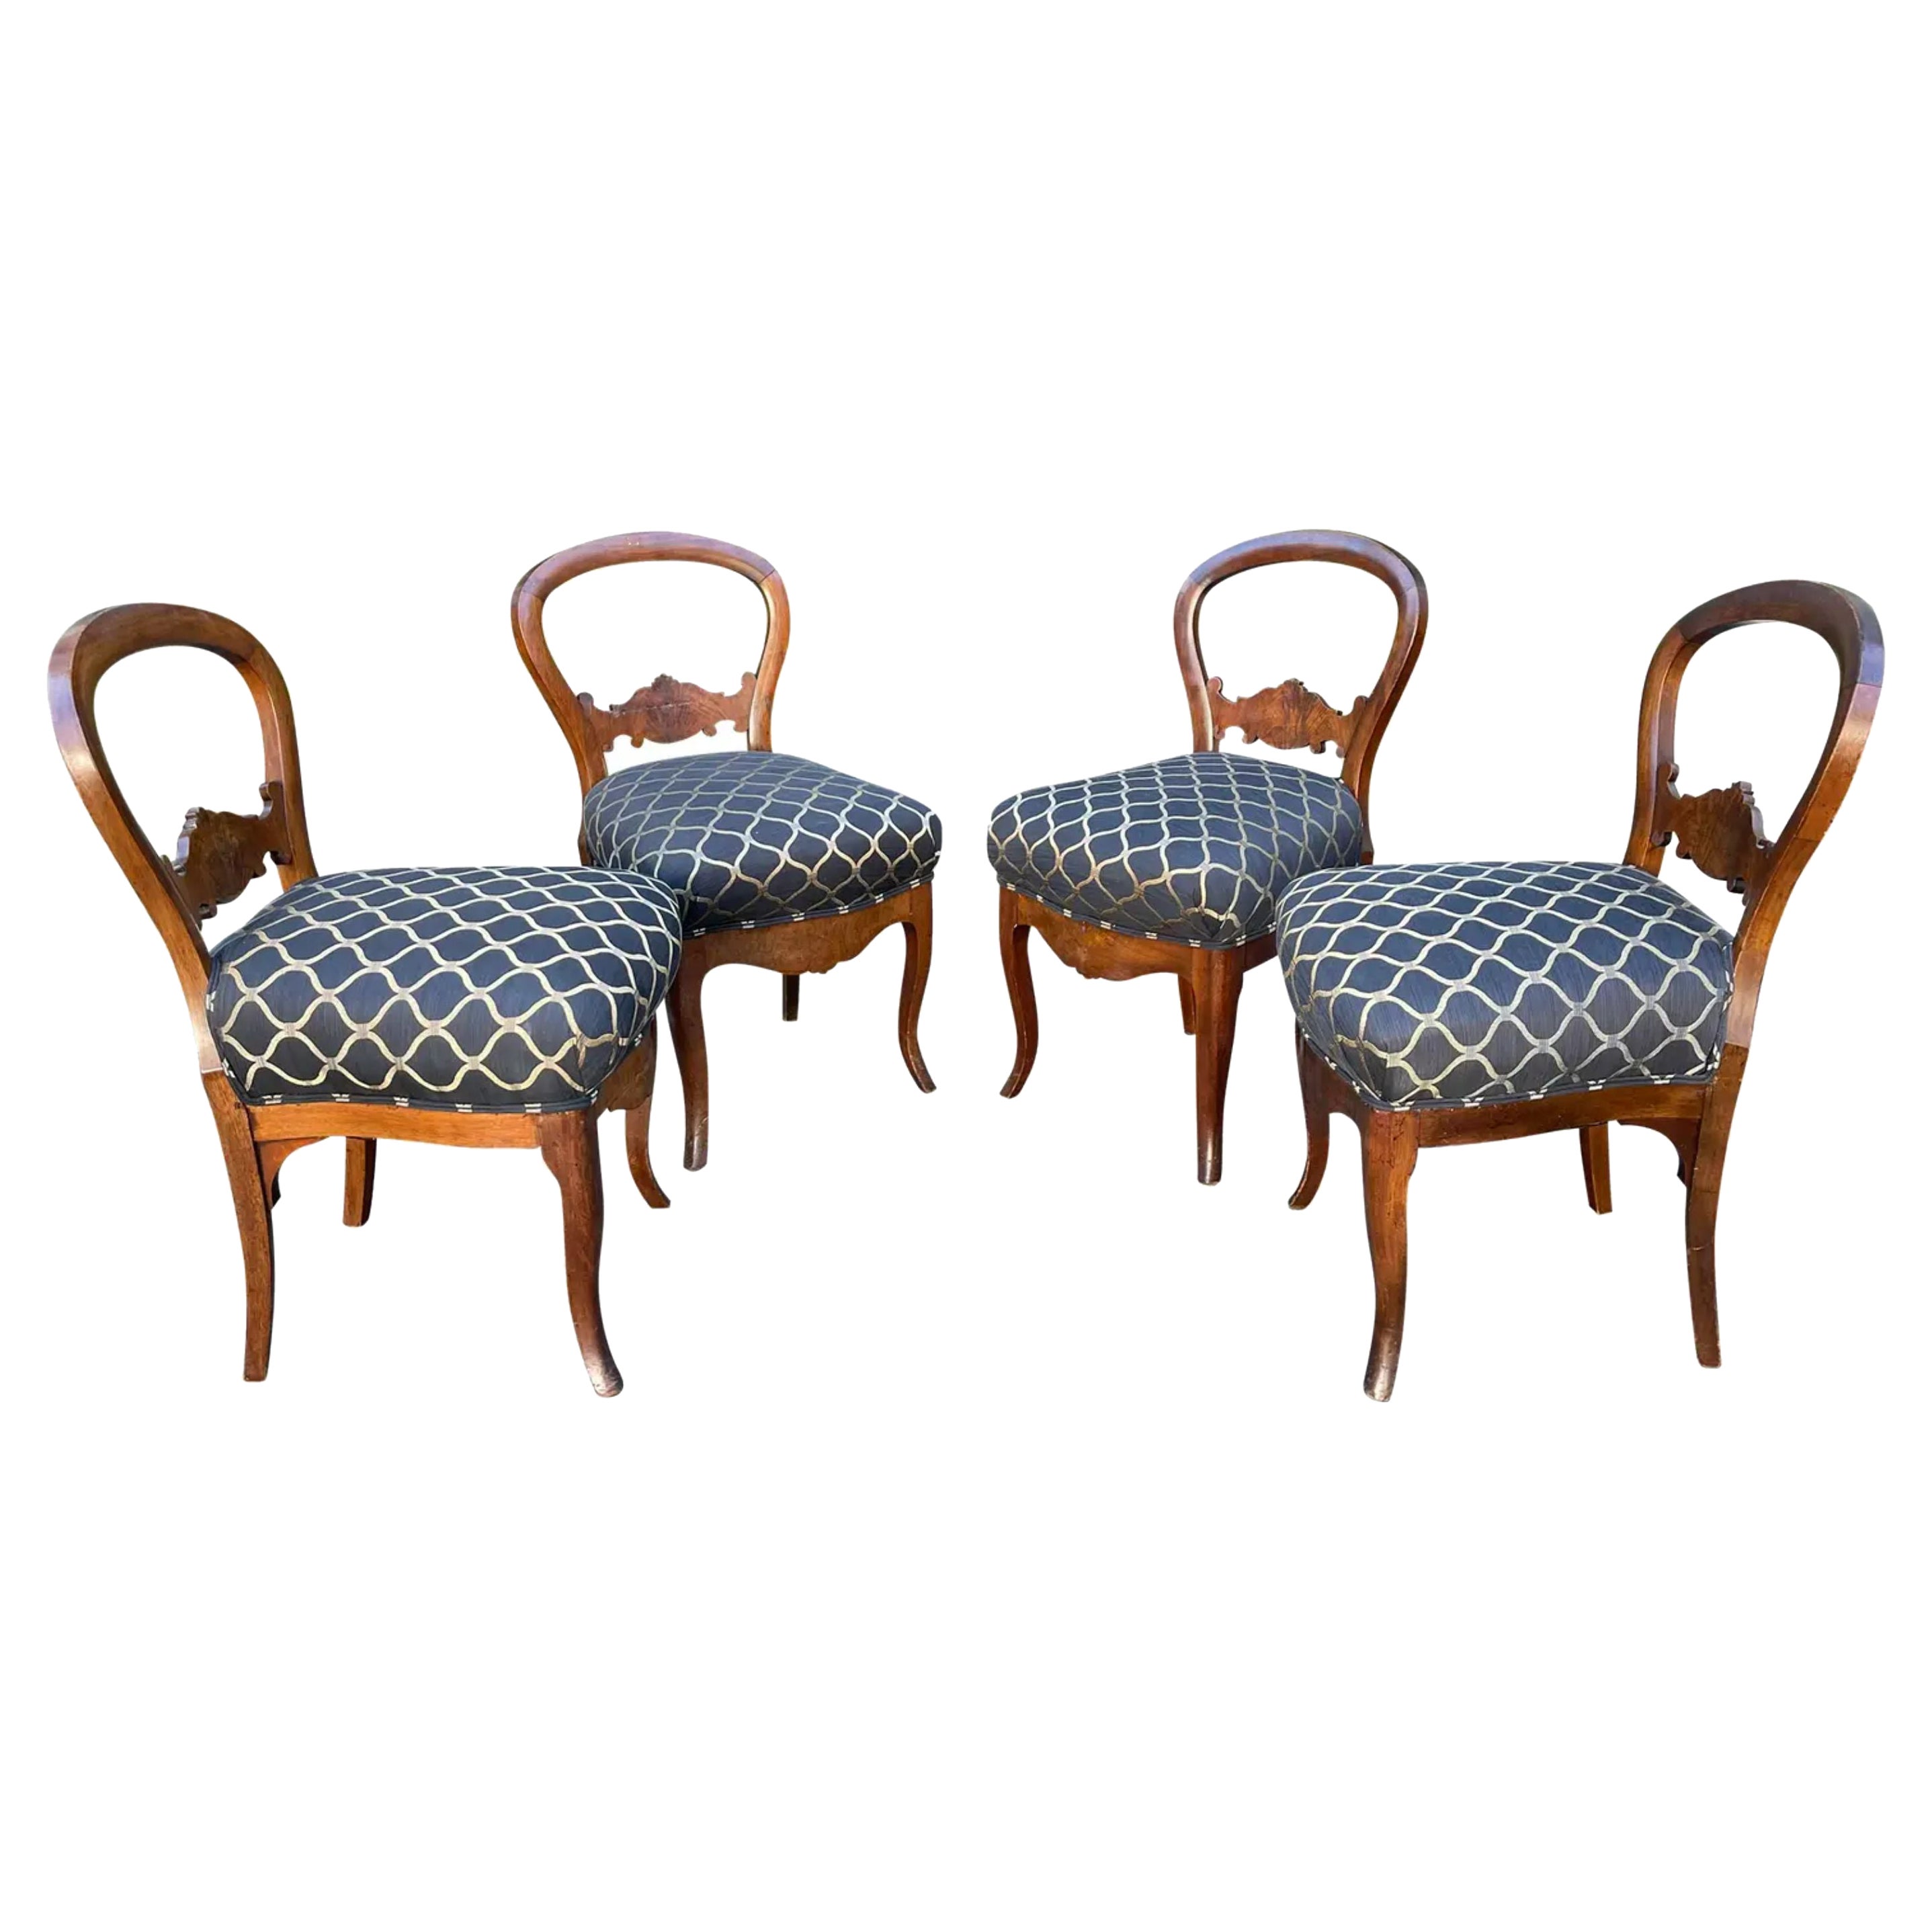 Antique Regency Period Mahogany Dining Chairs, Early 19th Century